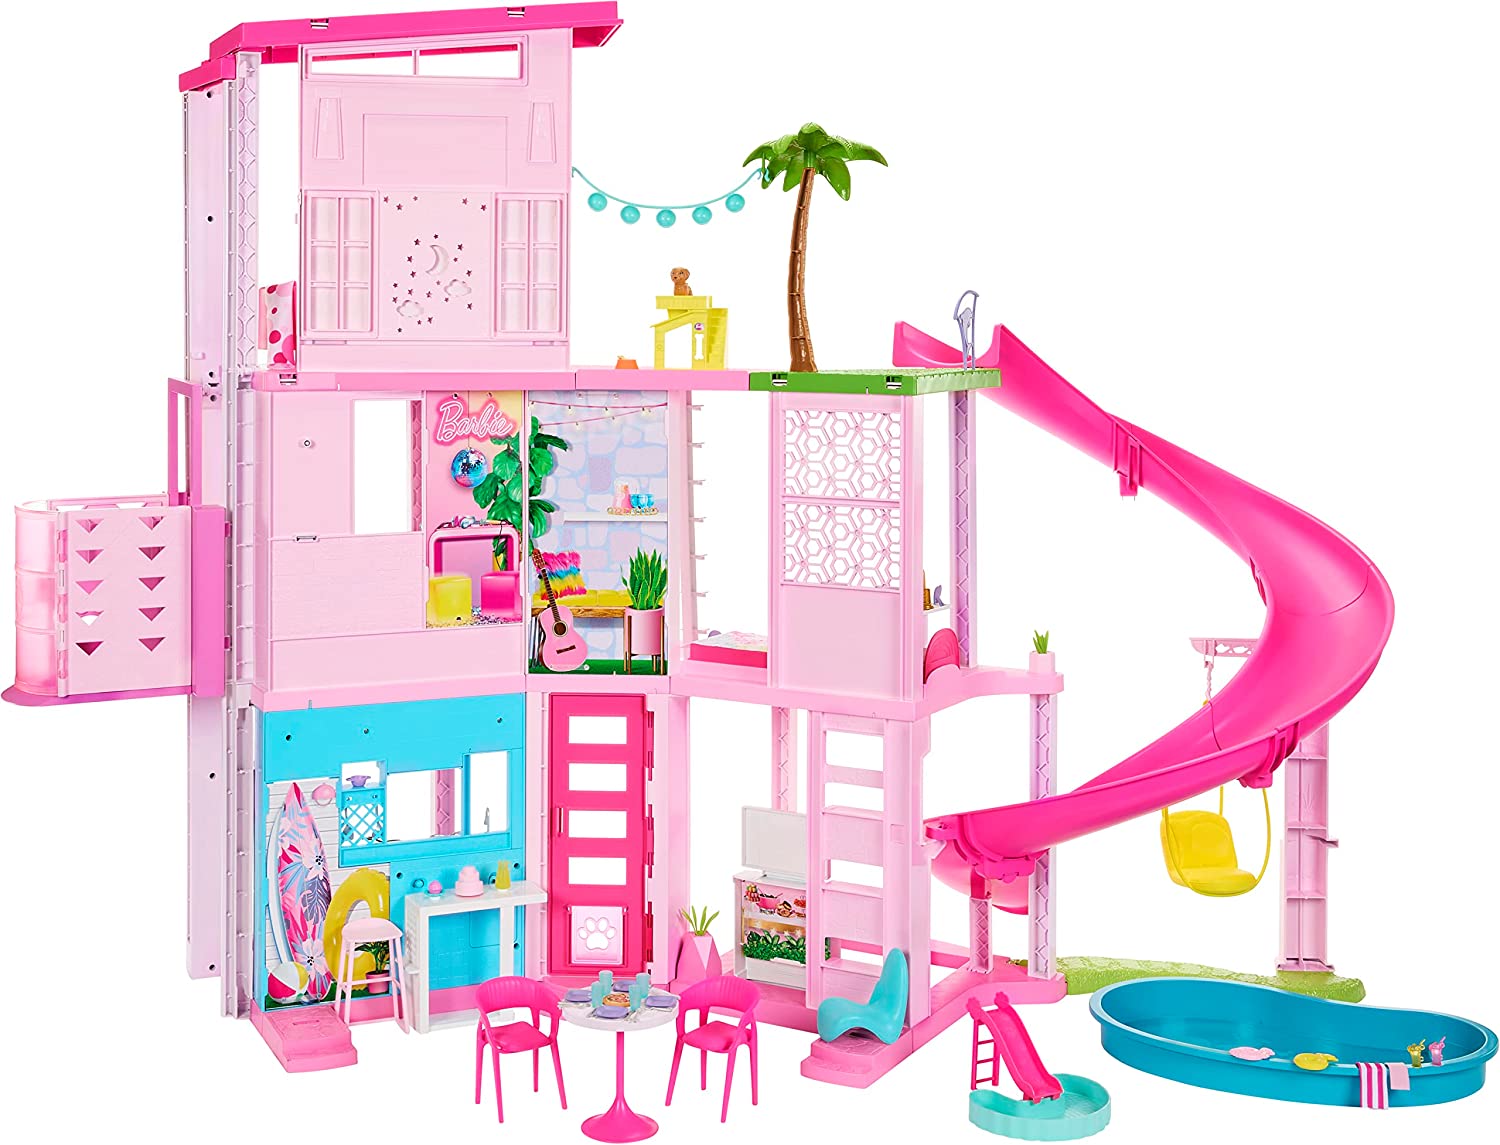 Barbie Dreamhouse 2023 doll house playset - YouLoveIt.com